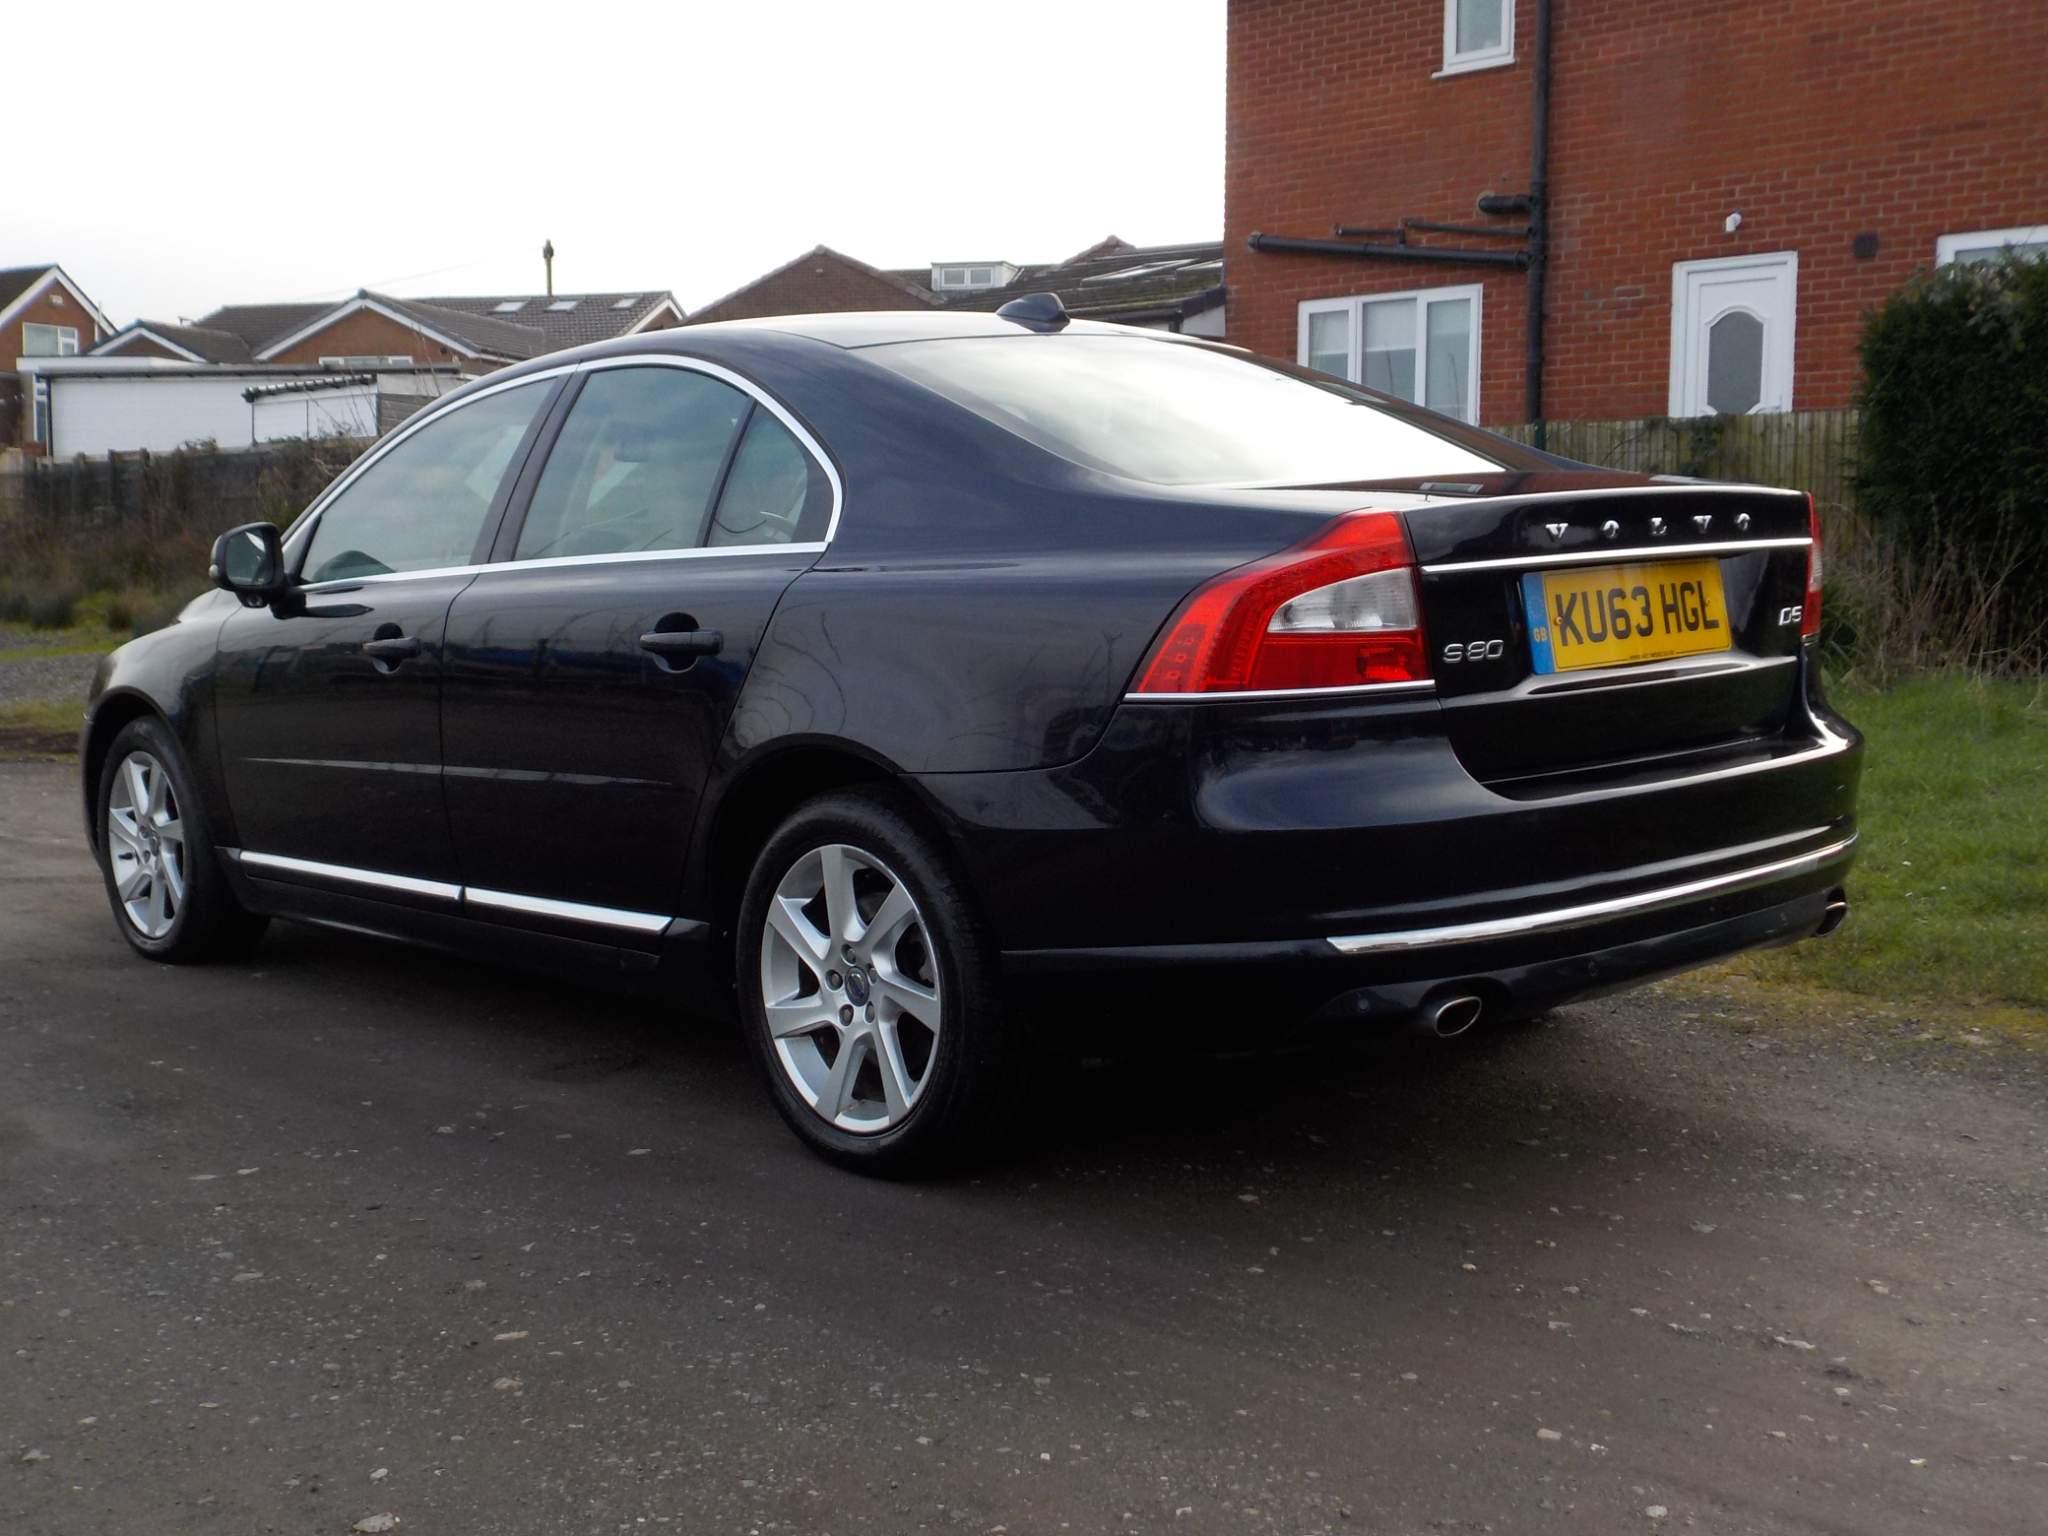 Volvo S80 2.4 D5 SE Lux Geartronic Euro 5 4dr